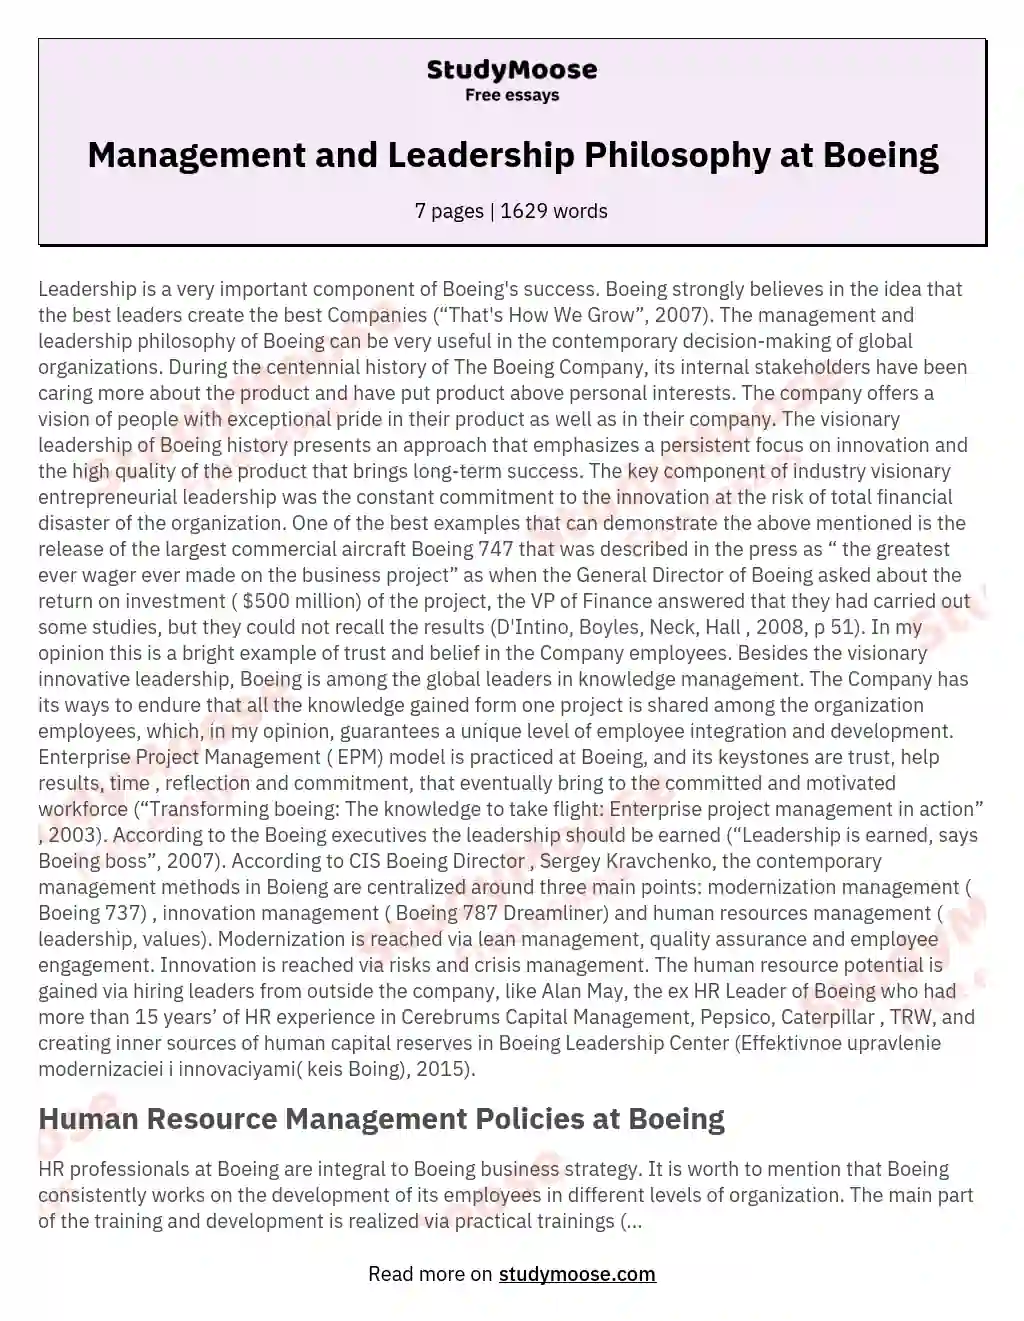 Management and Leadership Philosophy at Boeing essay